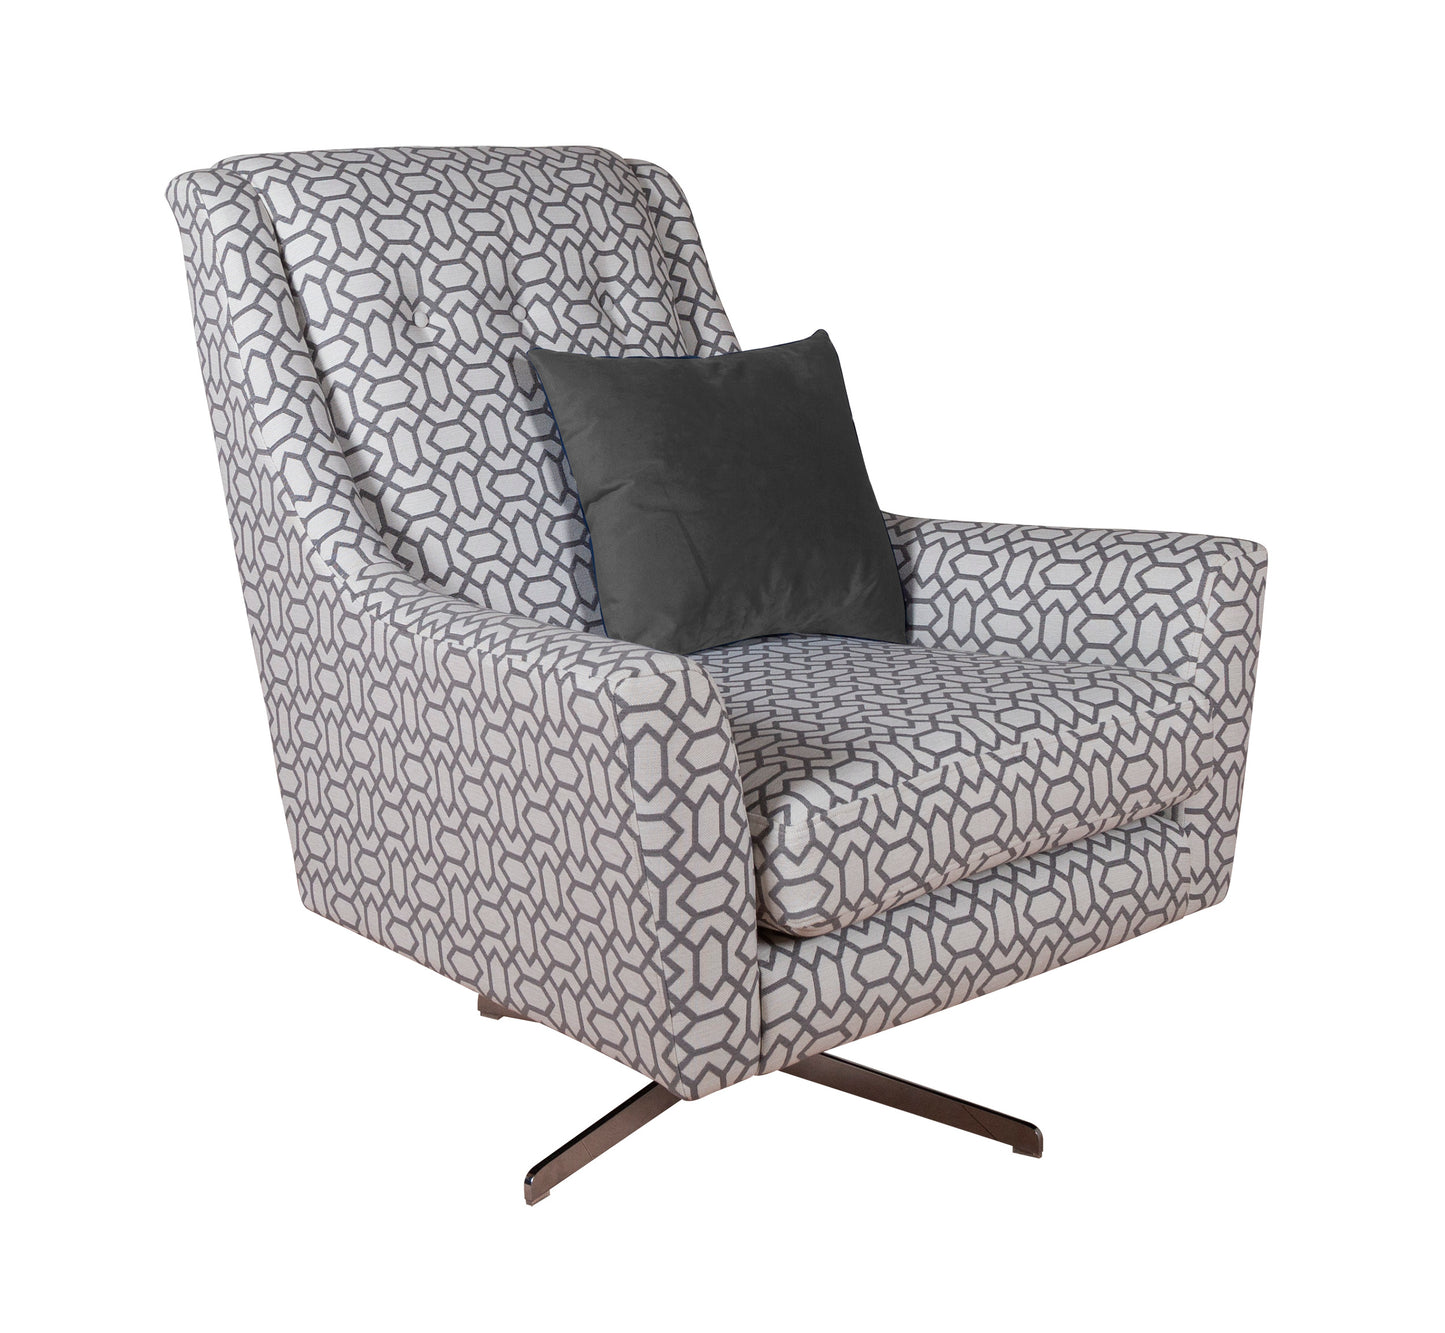 Fantasy Salute Patterned Swivel Accent Chair